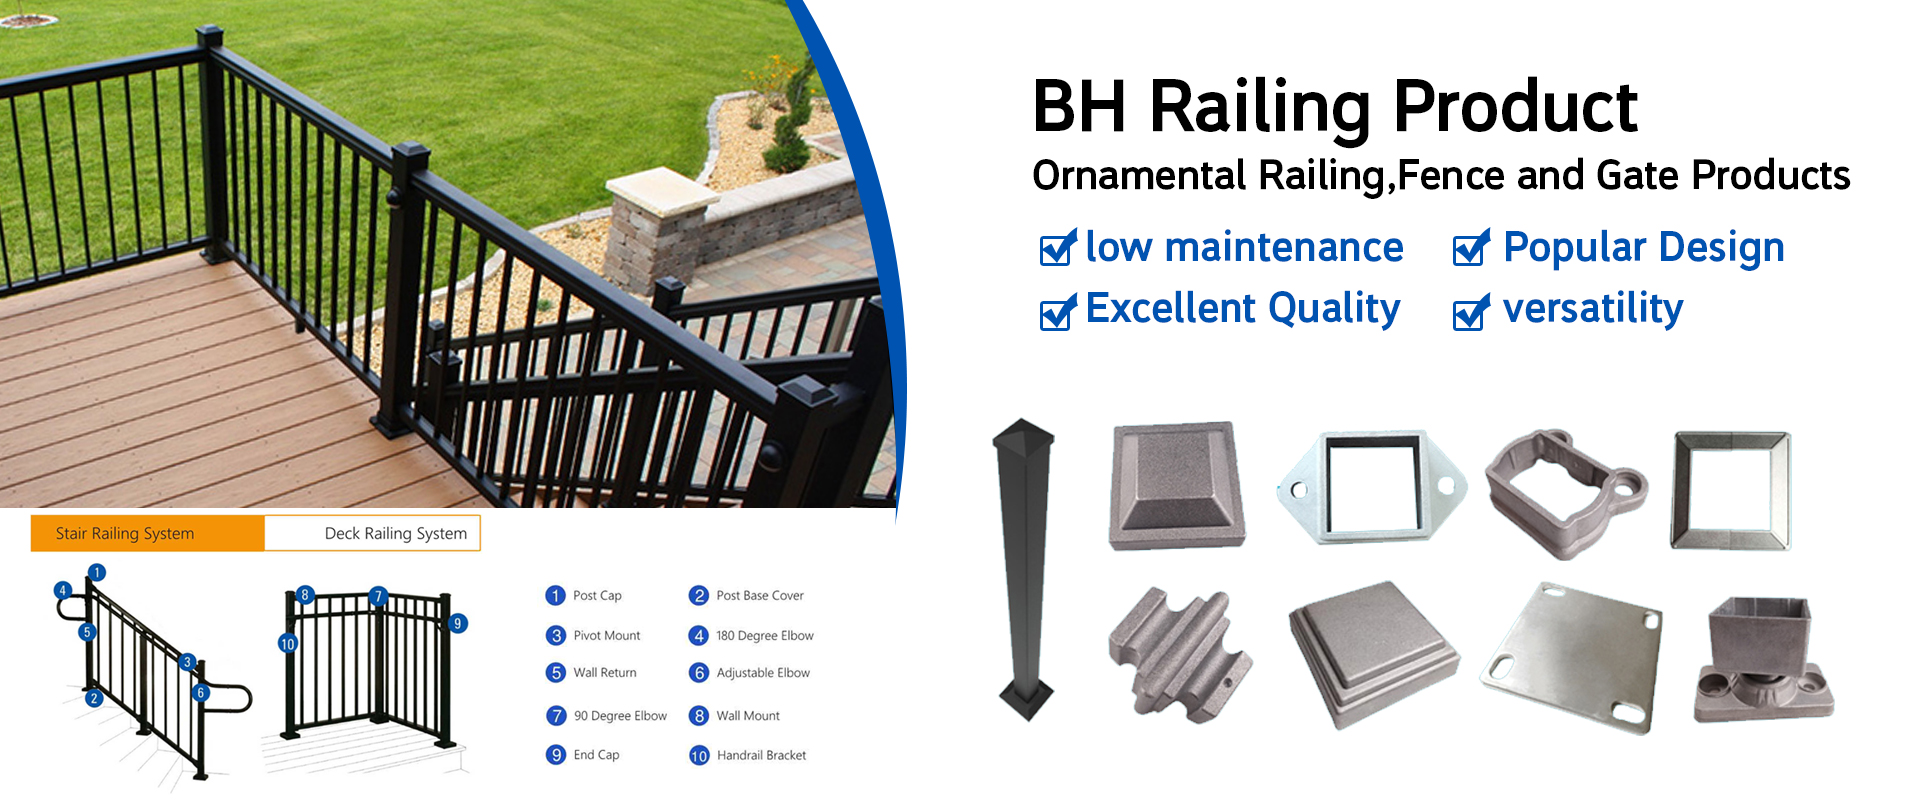 BH Railing Product Provide Best Solutions To Match Your Needs